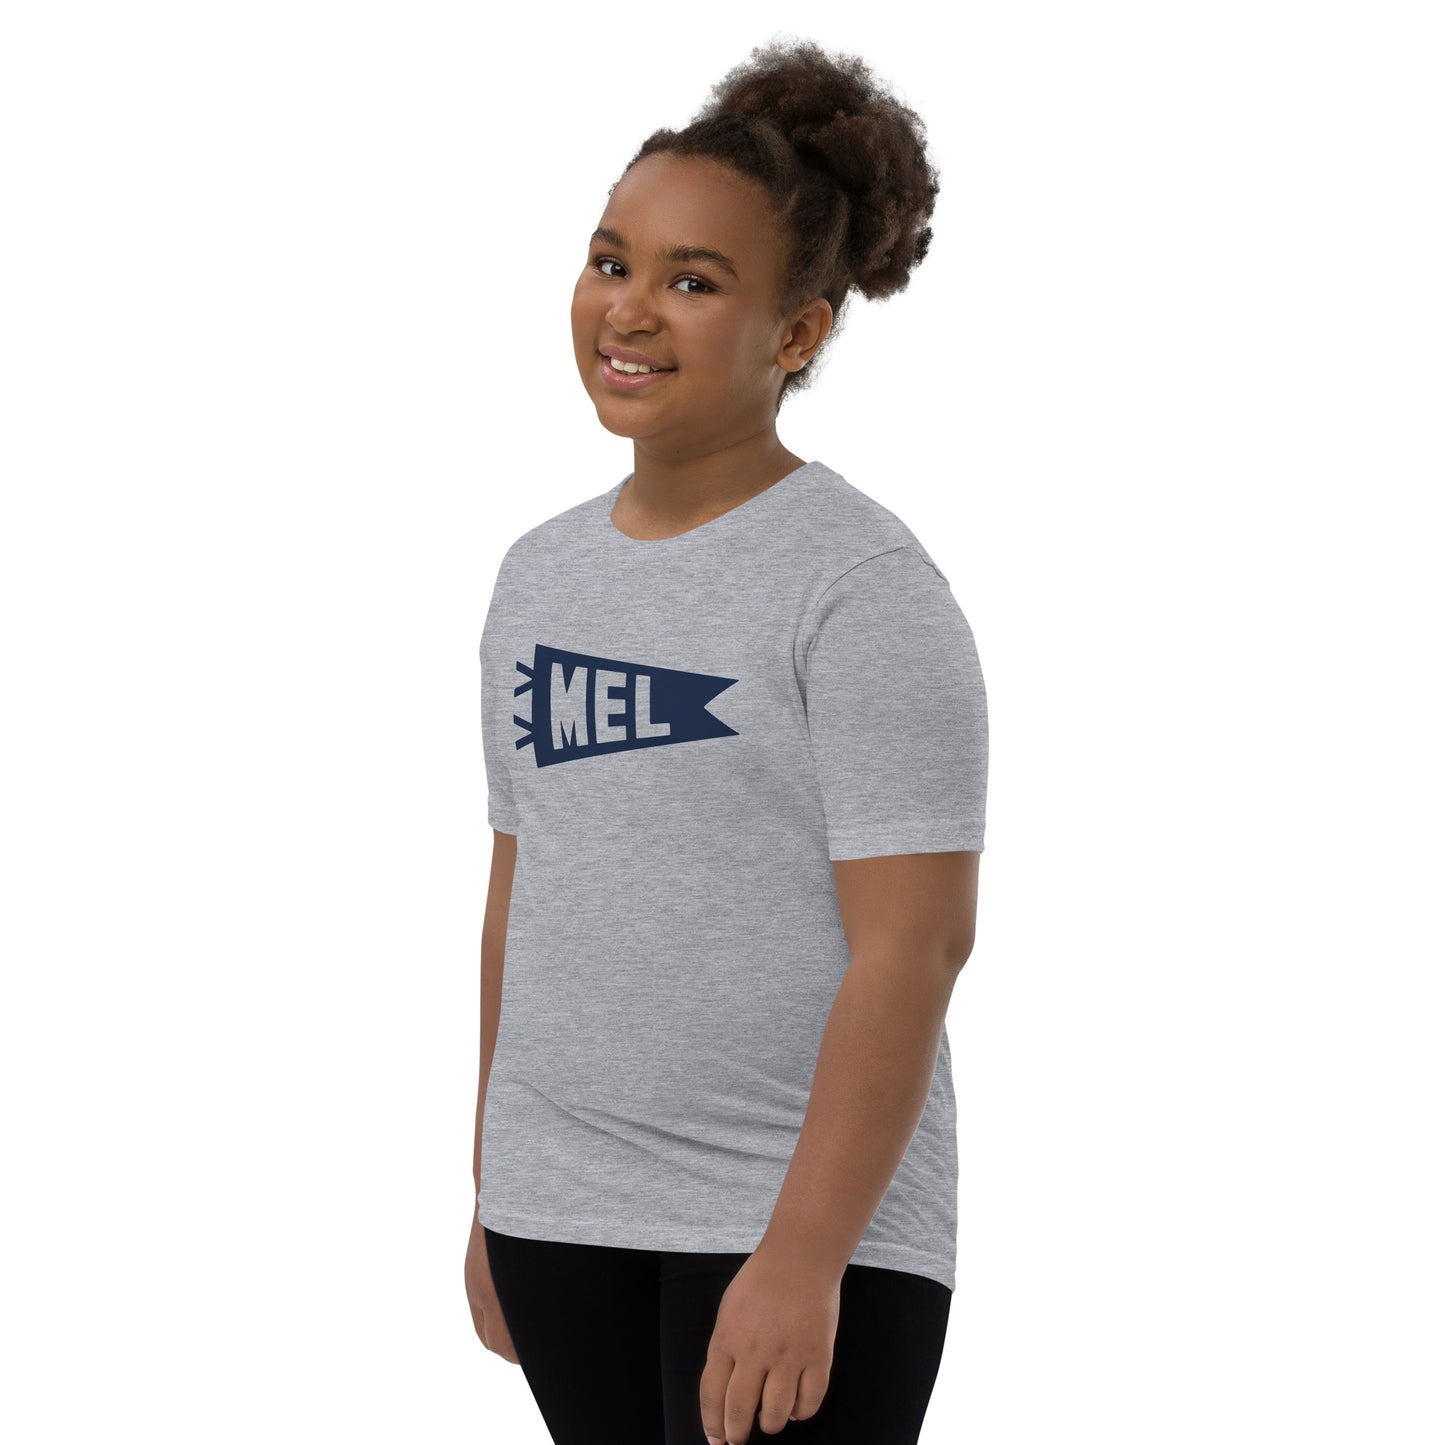 Kid's Airport Code Tee - Navy Blue Graphic • MEL Melbourne • YHM Designs - Image 04